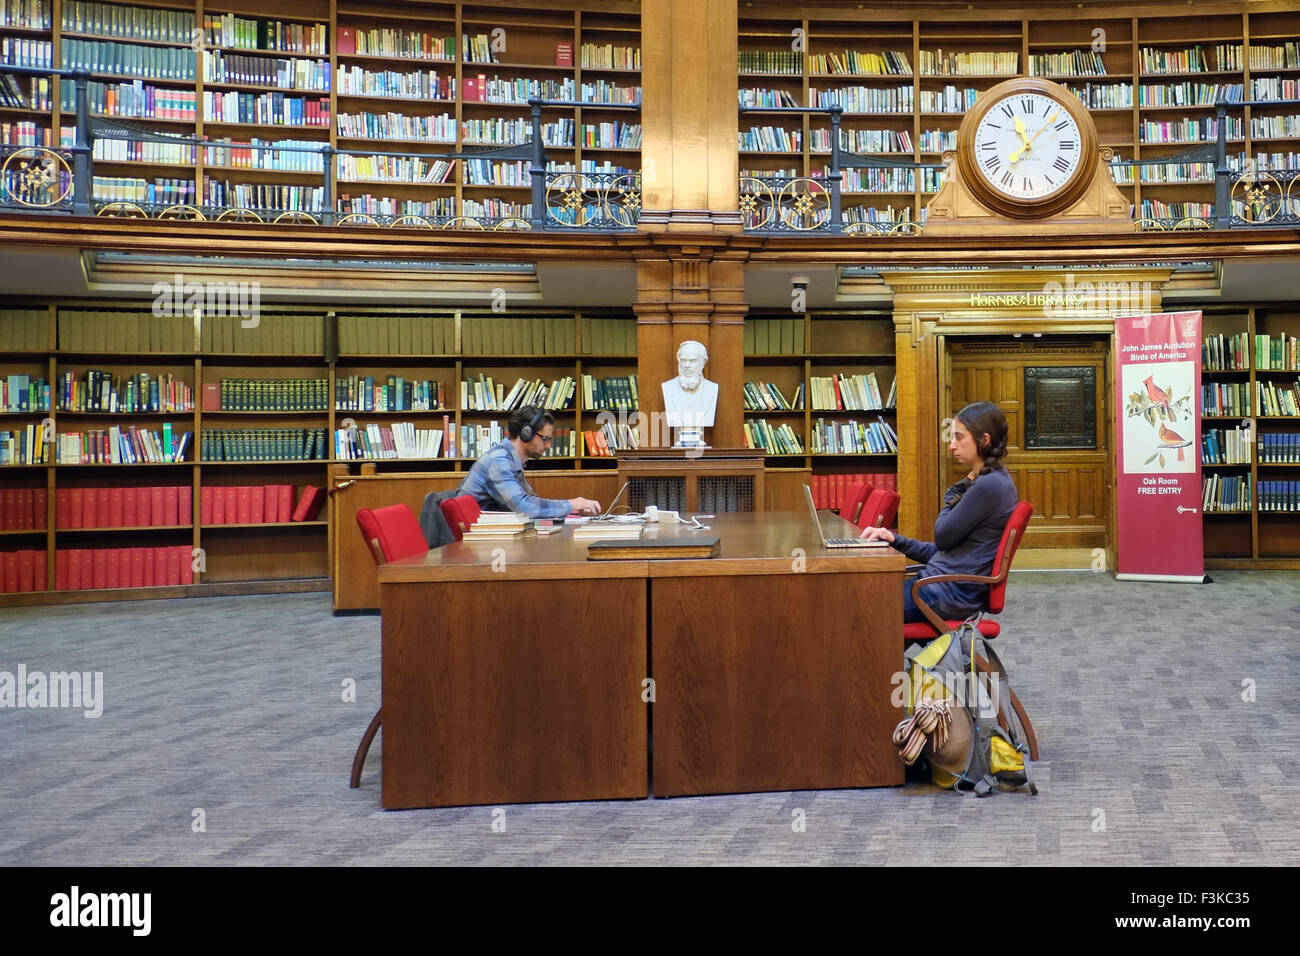 A picture of the inside of Liverpool's famous study Picton library with students, stacked shelves, clock & ornate fittings, Liverpool, Merseyside, UK Stock Photo